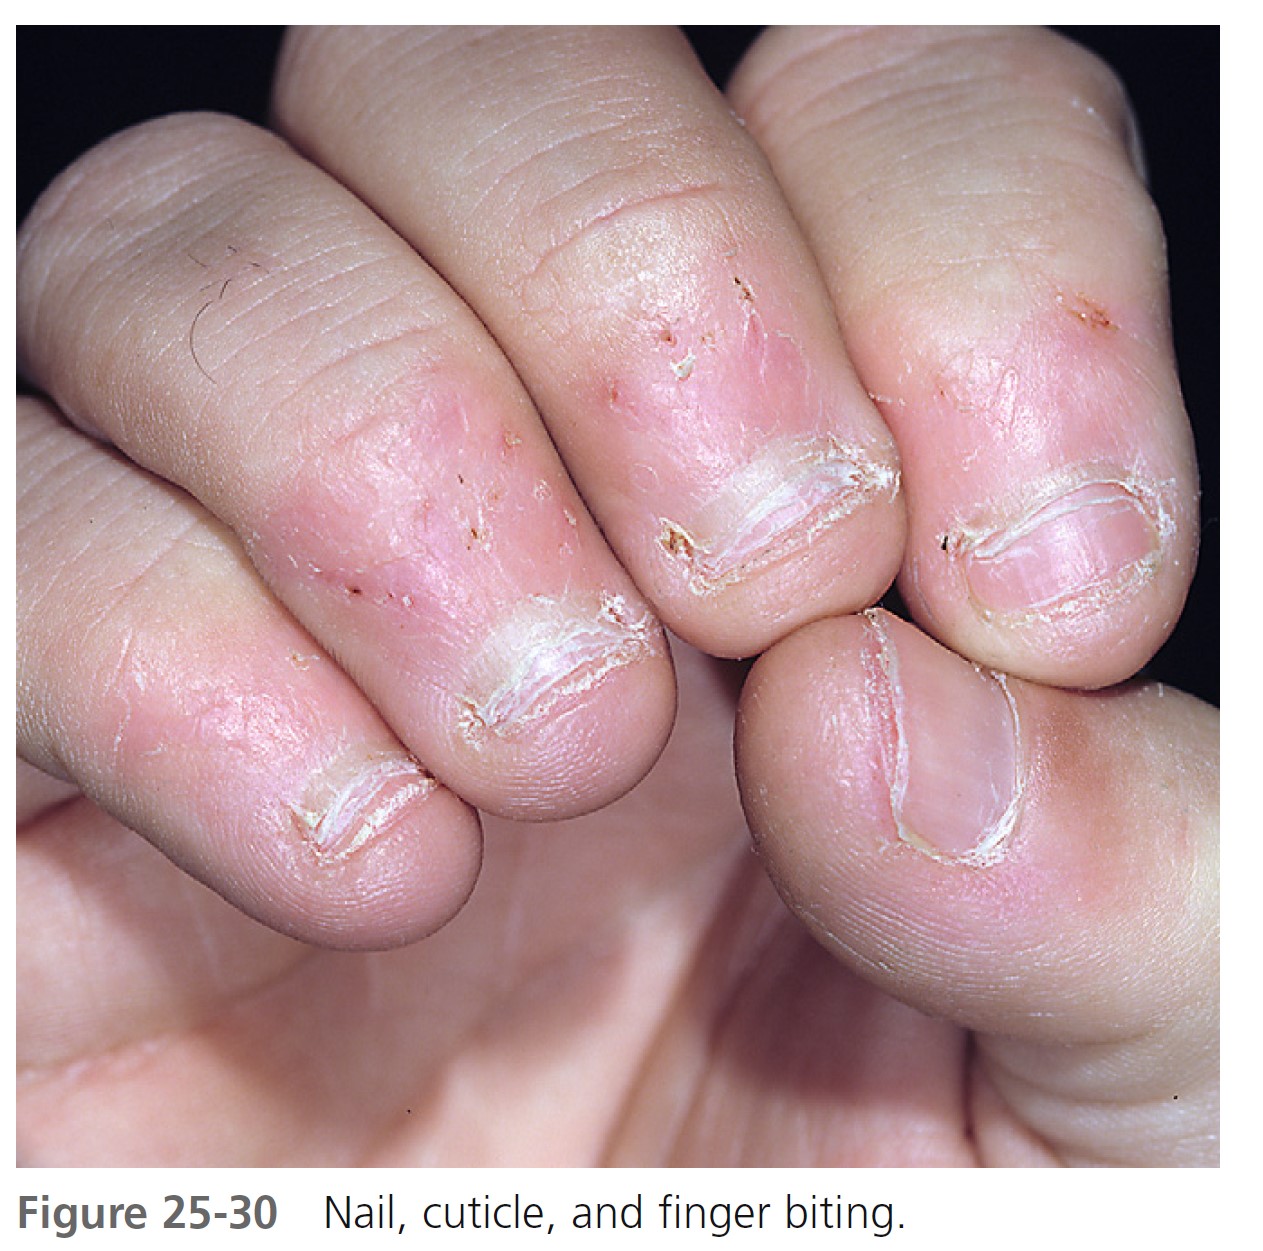 What causes black spots to appear on your nails after biting them? - Quora